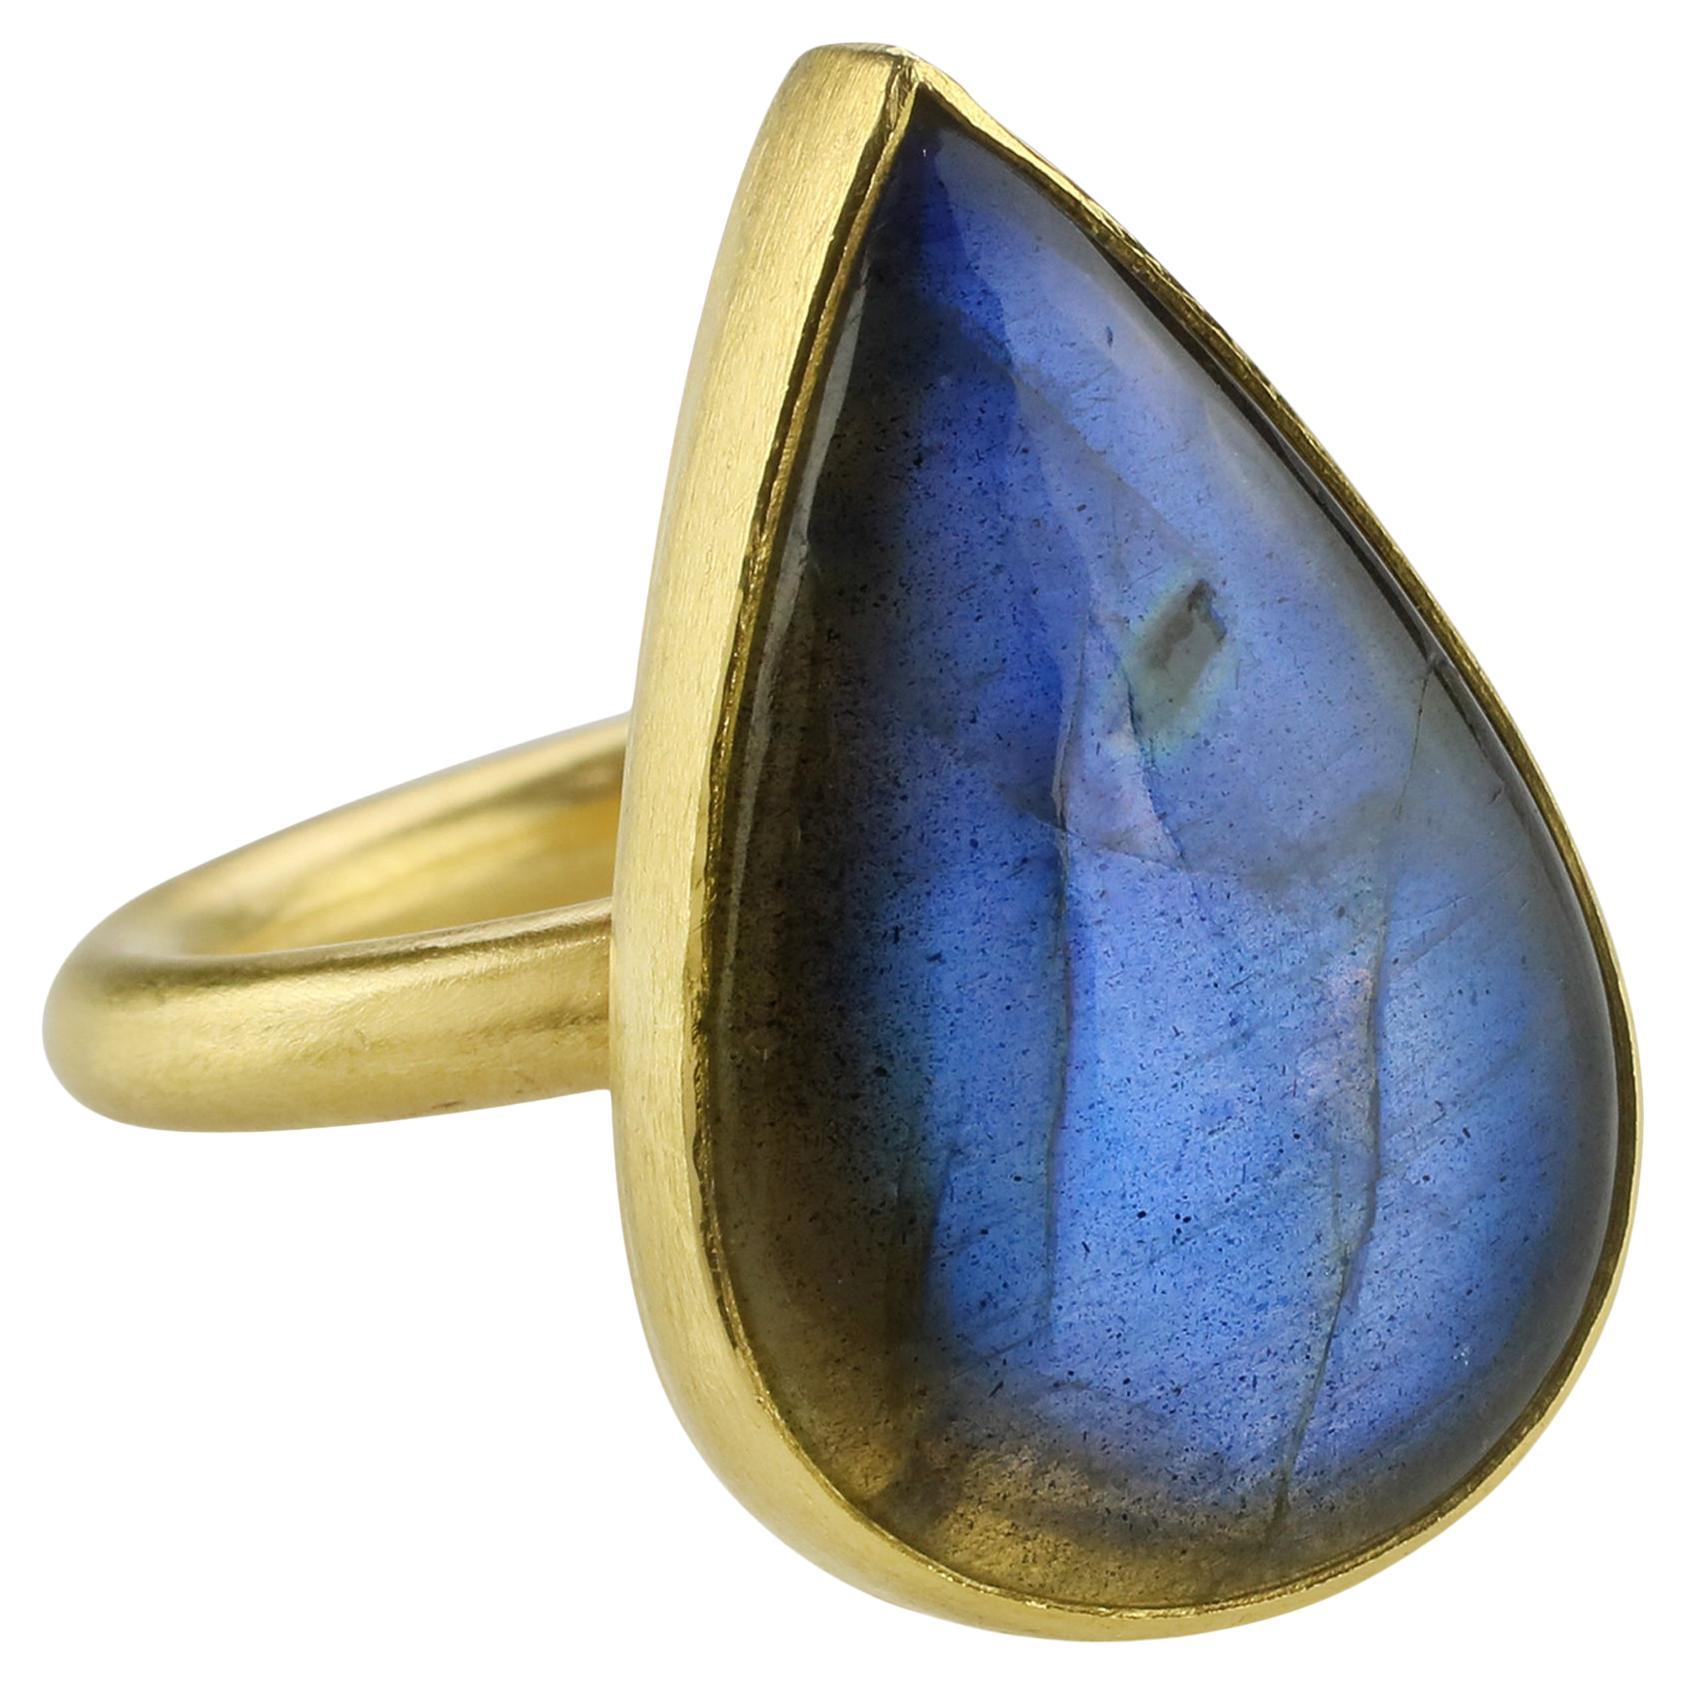 PHILIPPE SPENCER 20.87 Ct. Labradorite in 22K and 20K Gold Statement Ring For Sale